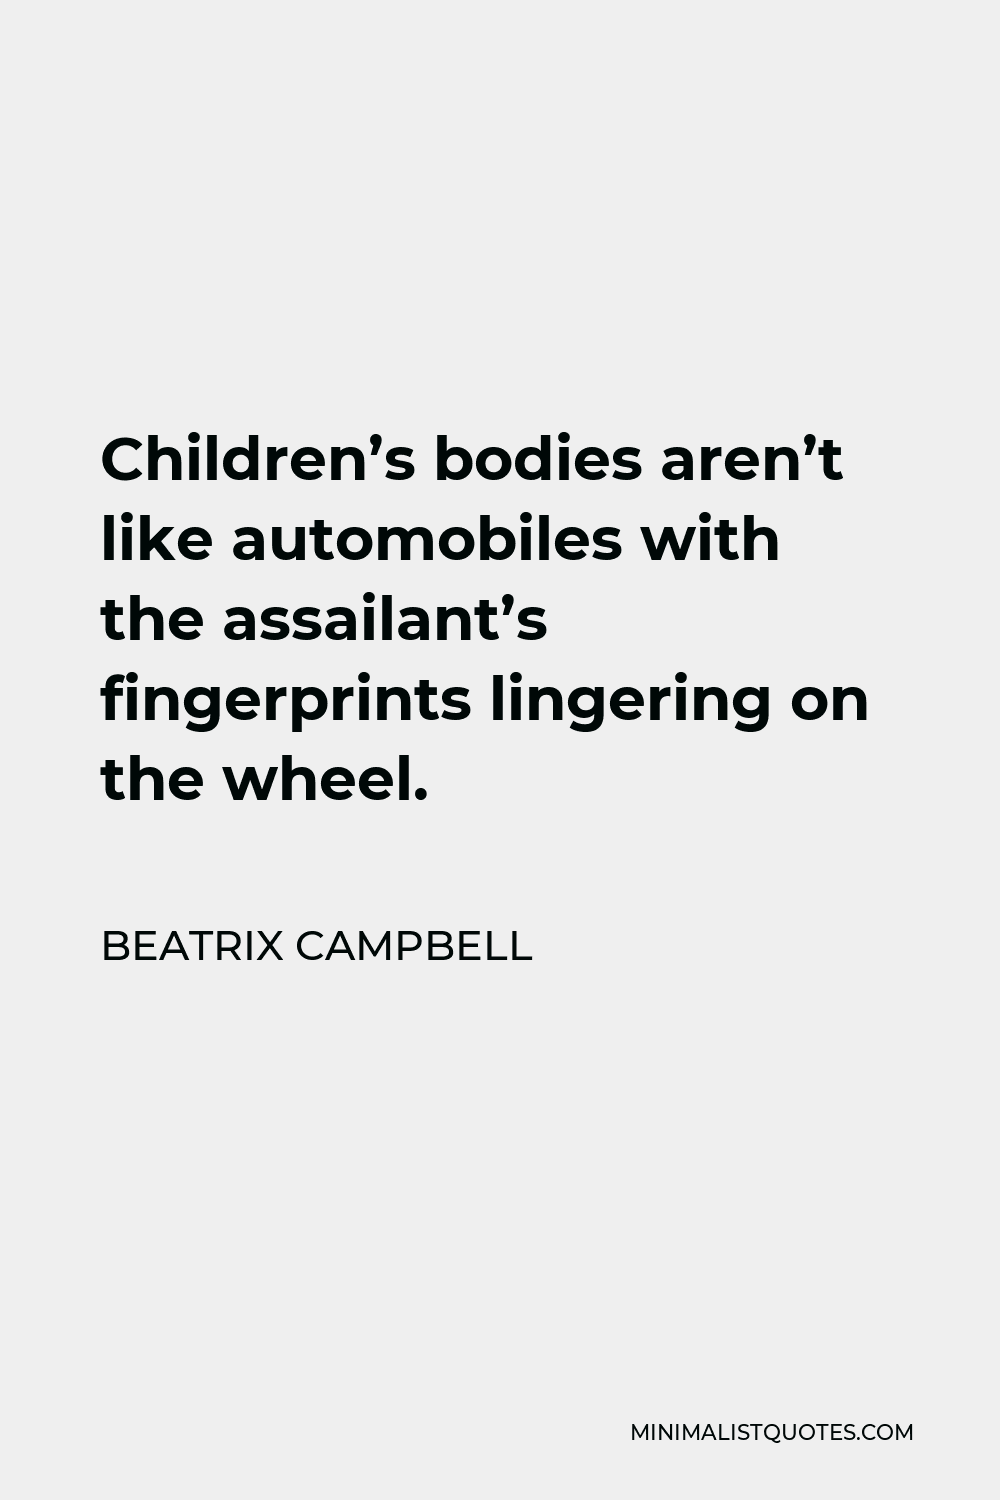 Beatrix Campbell Quote - Children’s bodies aren’t like automobiles with the assailant’s fingerprints lingering on the wheel.